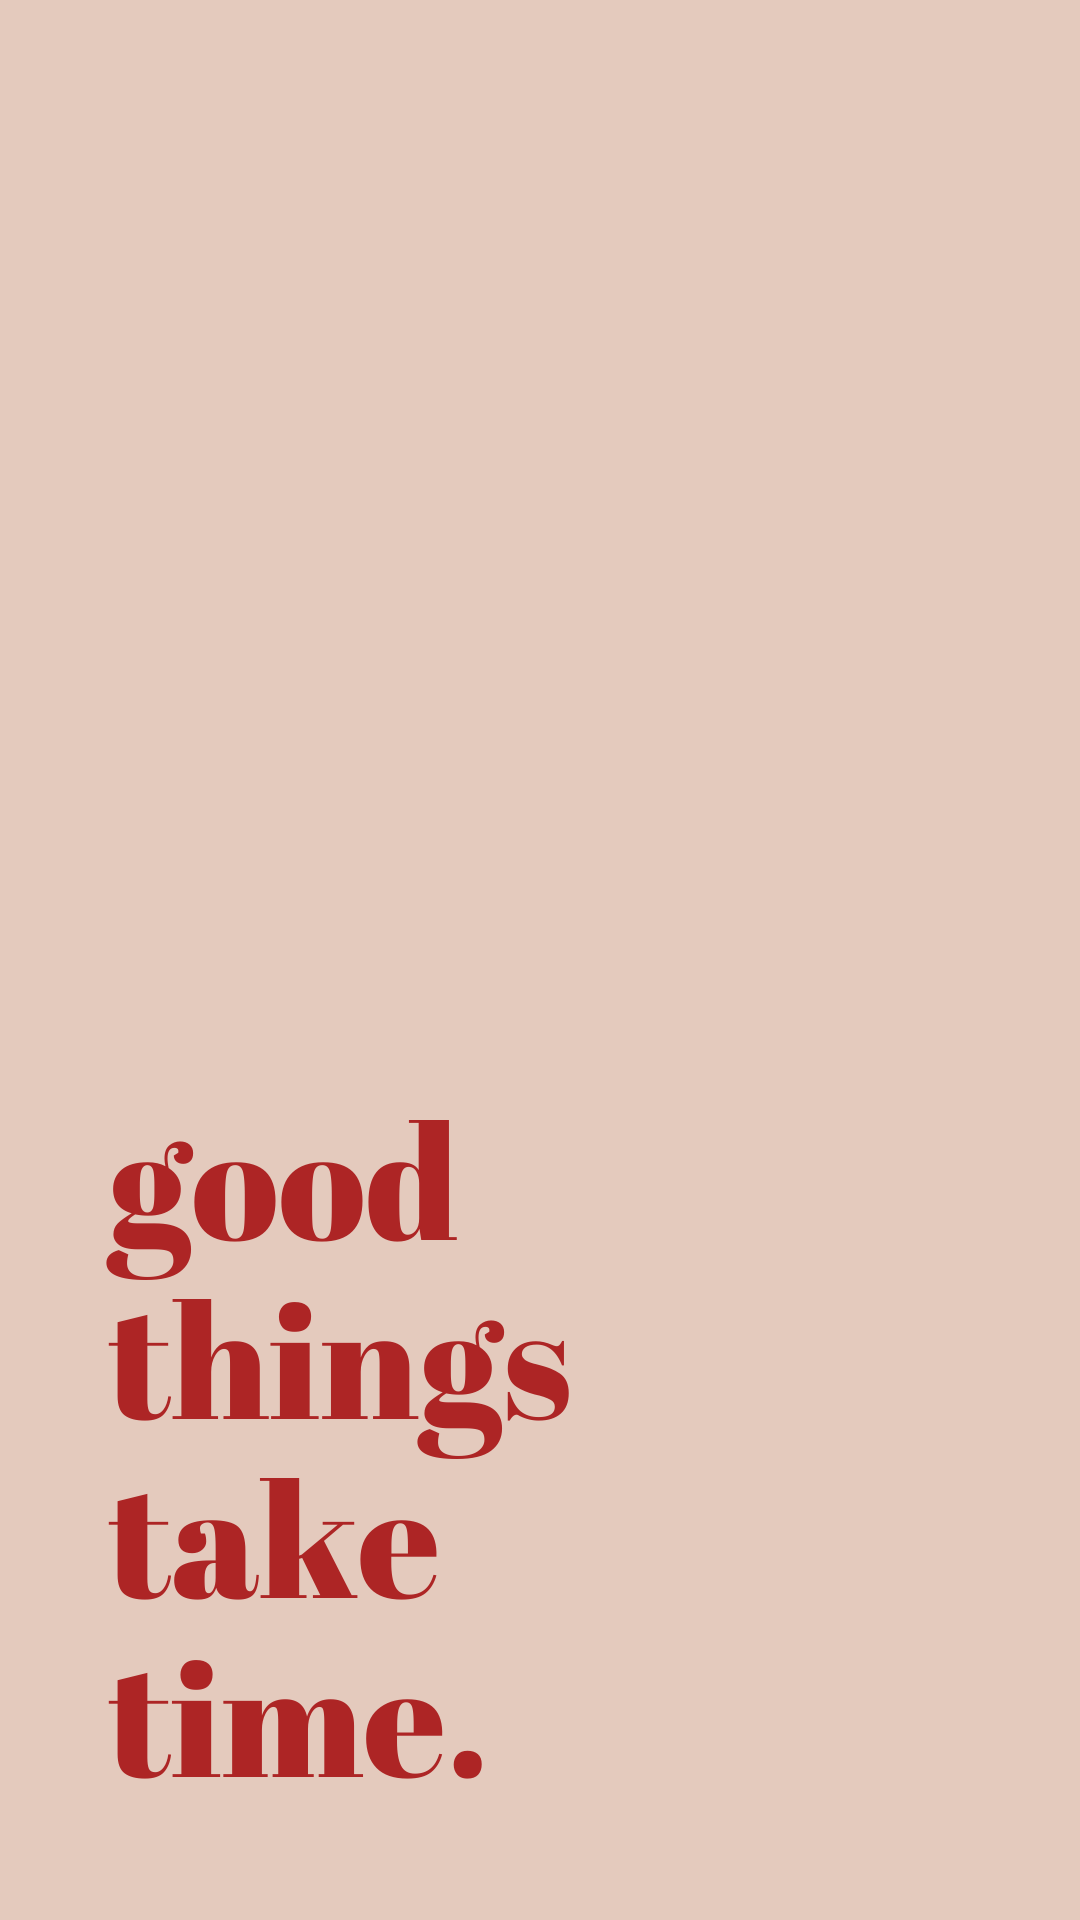 Phone wallpaper quotes: GOOD THINGS TAKE TIME. Words wallpaper, Positive quotes, Good things take time